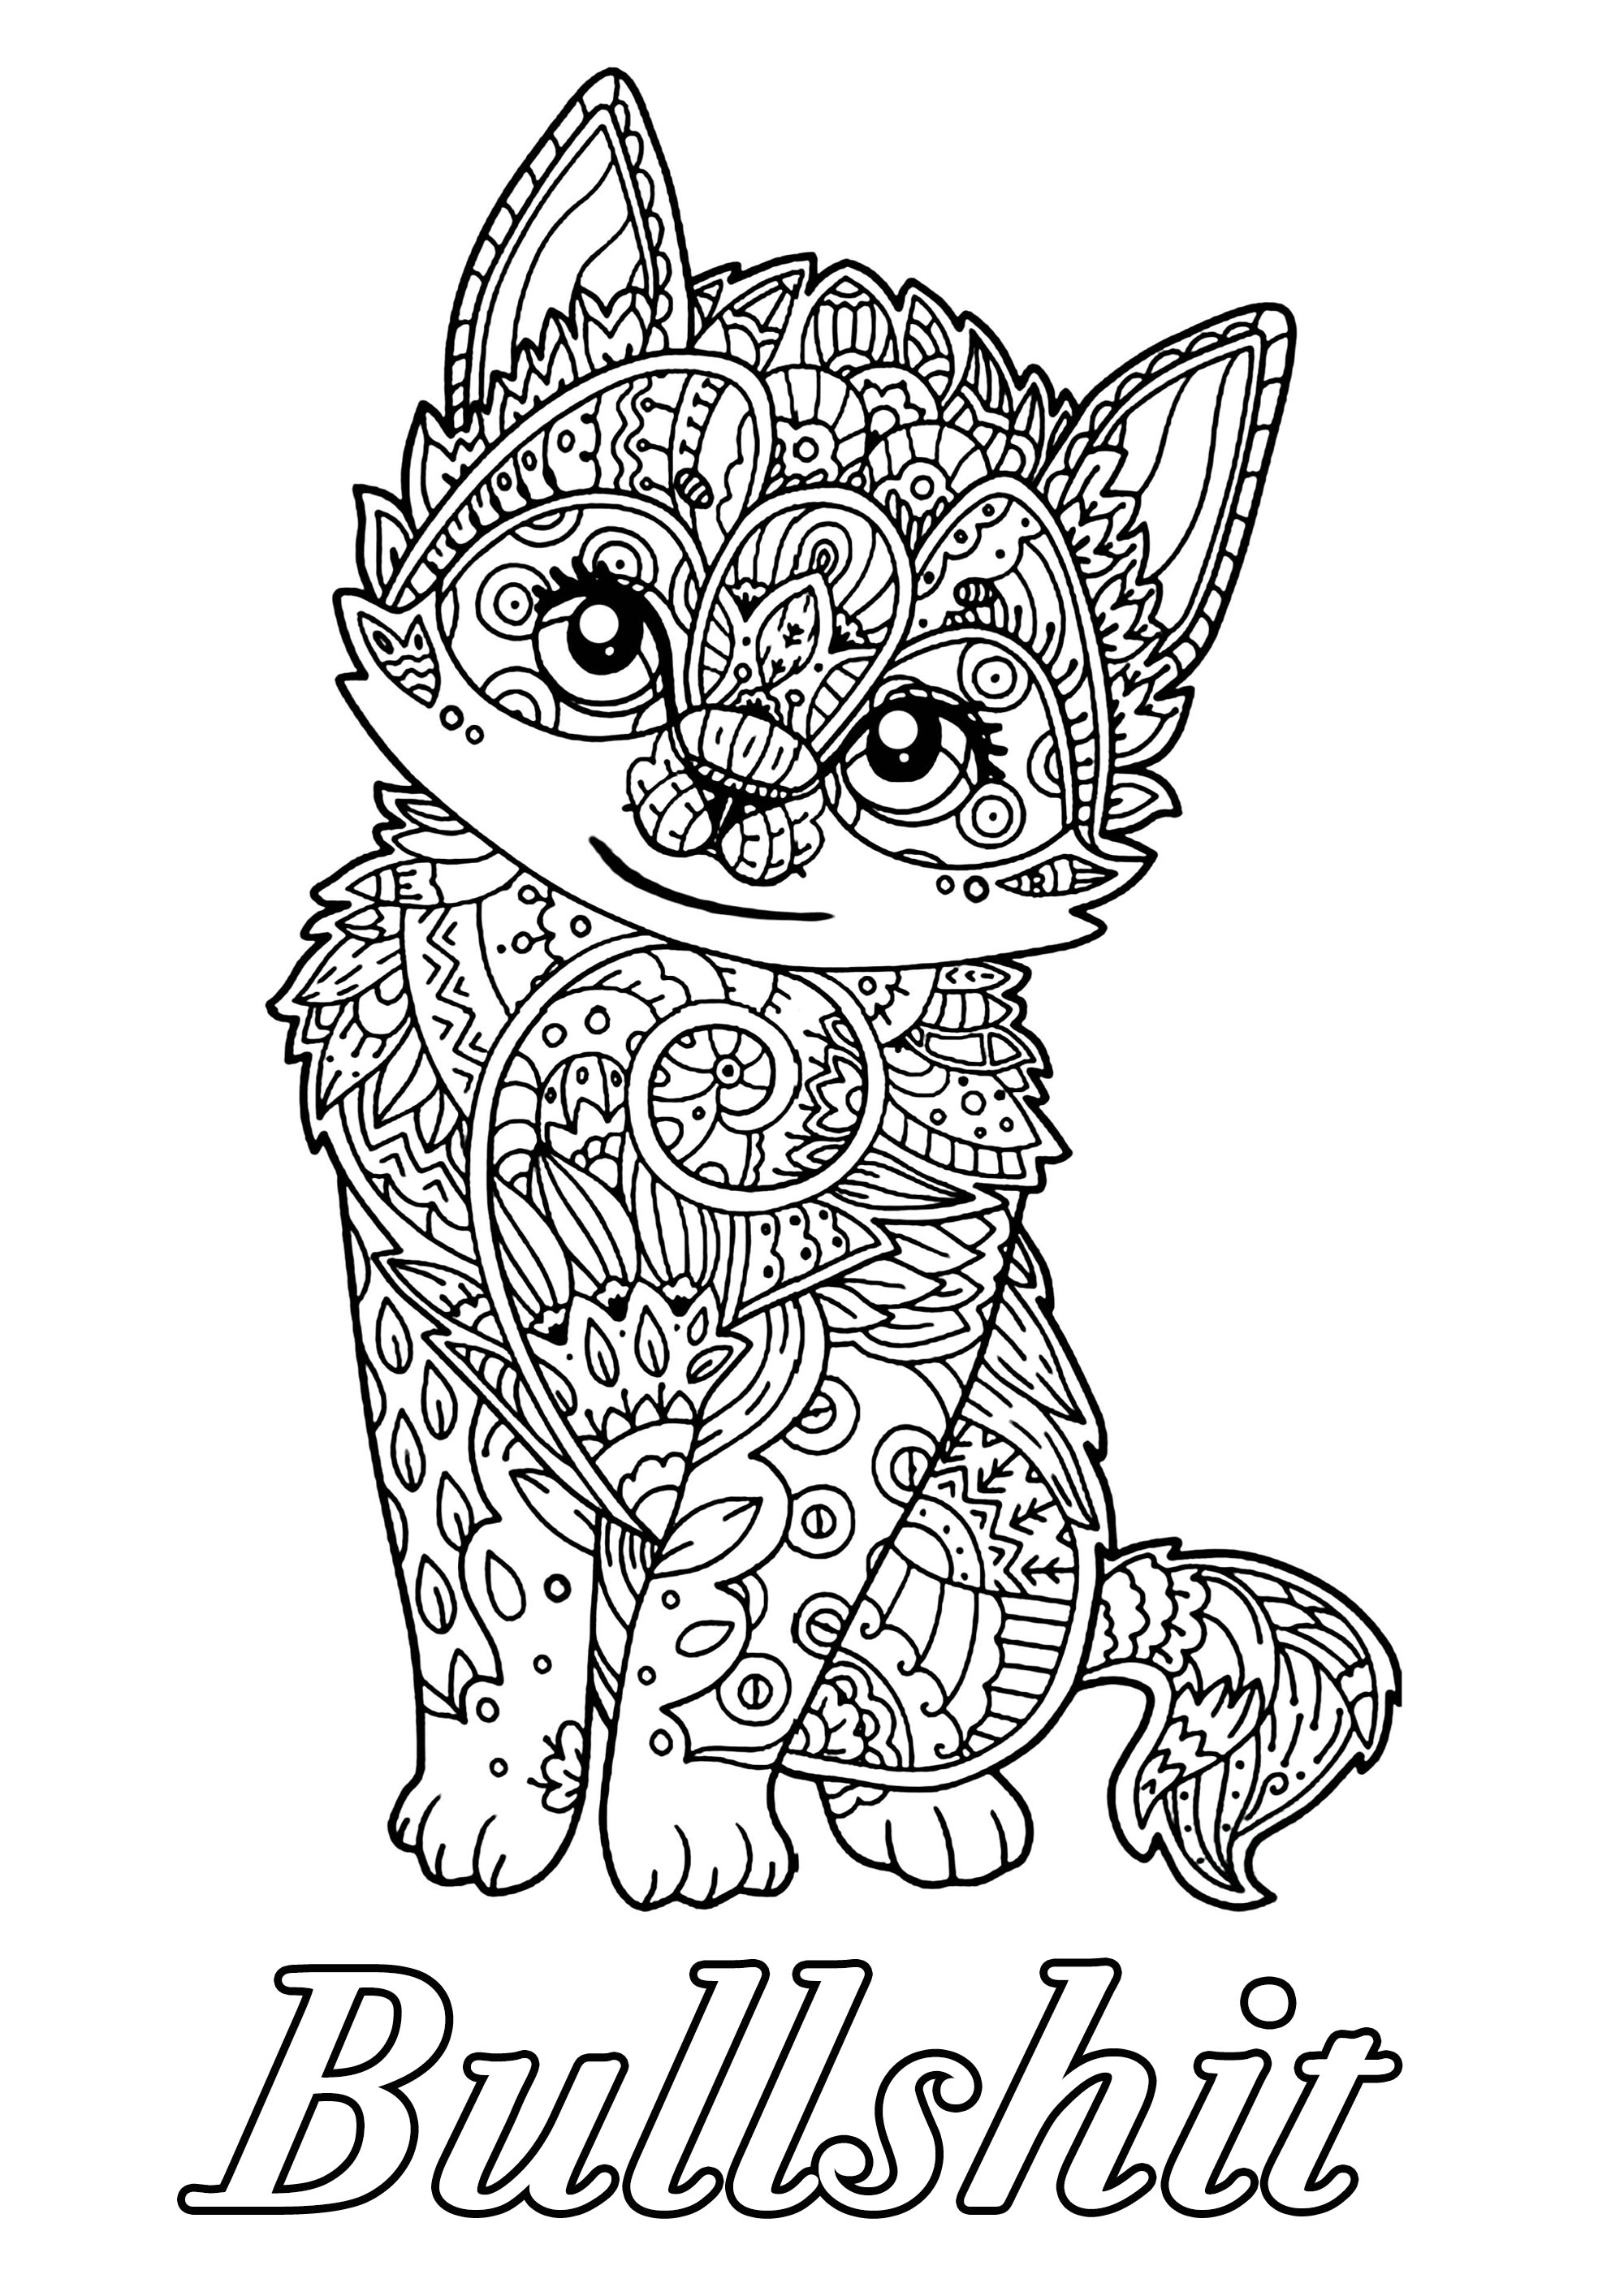 Download Bullshit Swear word coloring page - Swear word Adult Coloring Pages